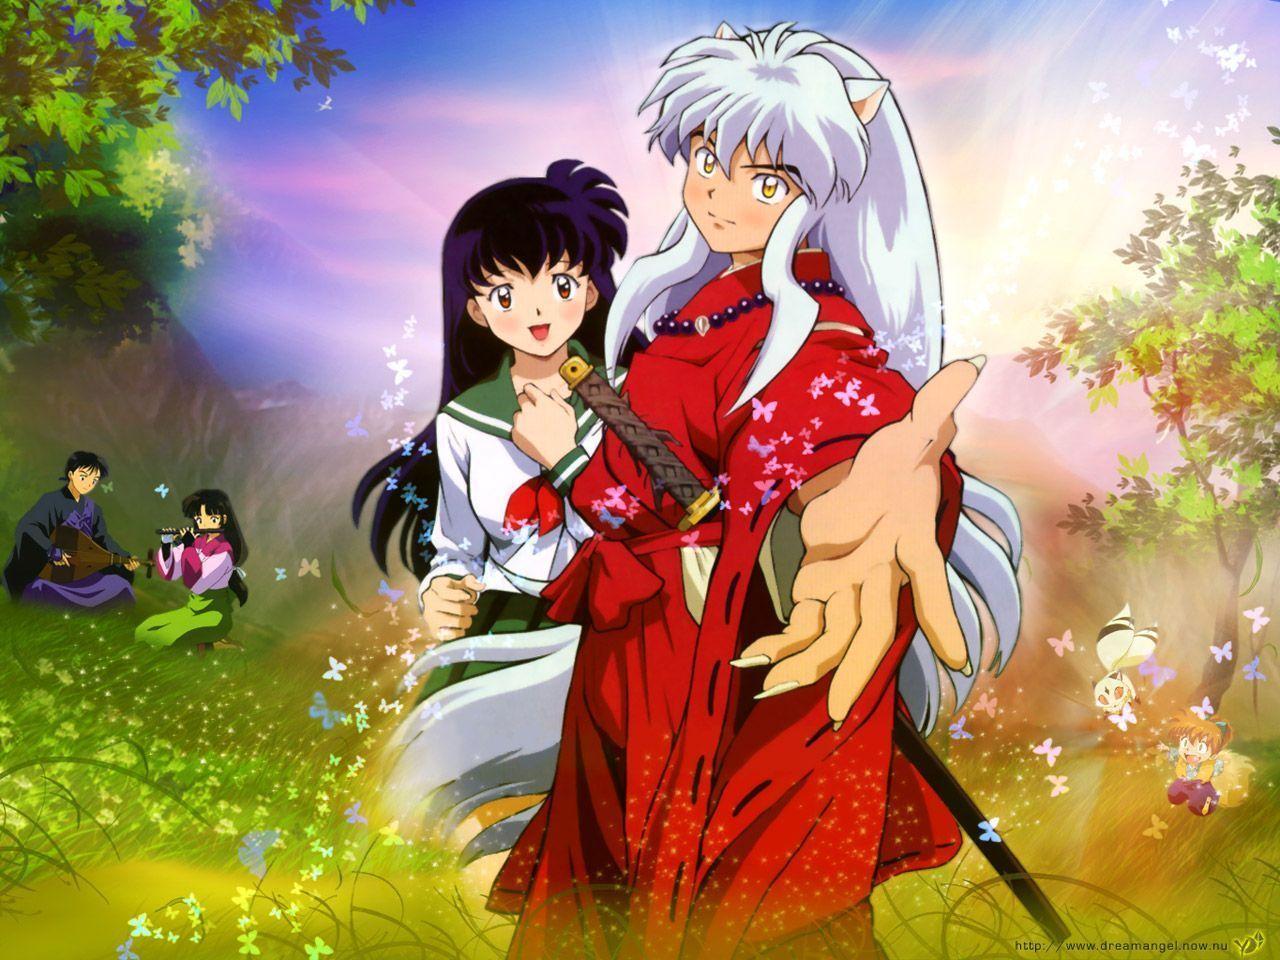 Inuyasha Characters Wallpaper Image & Picture. Animated